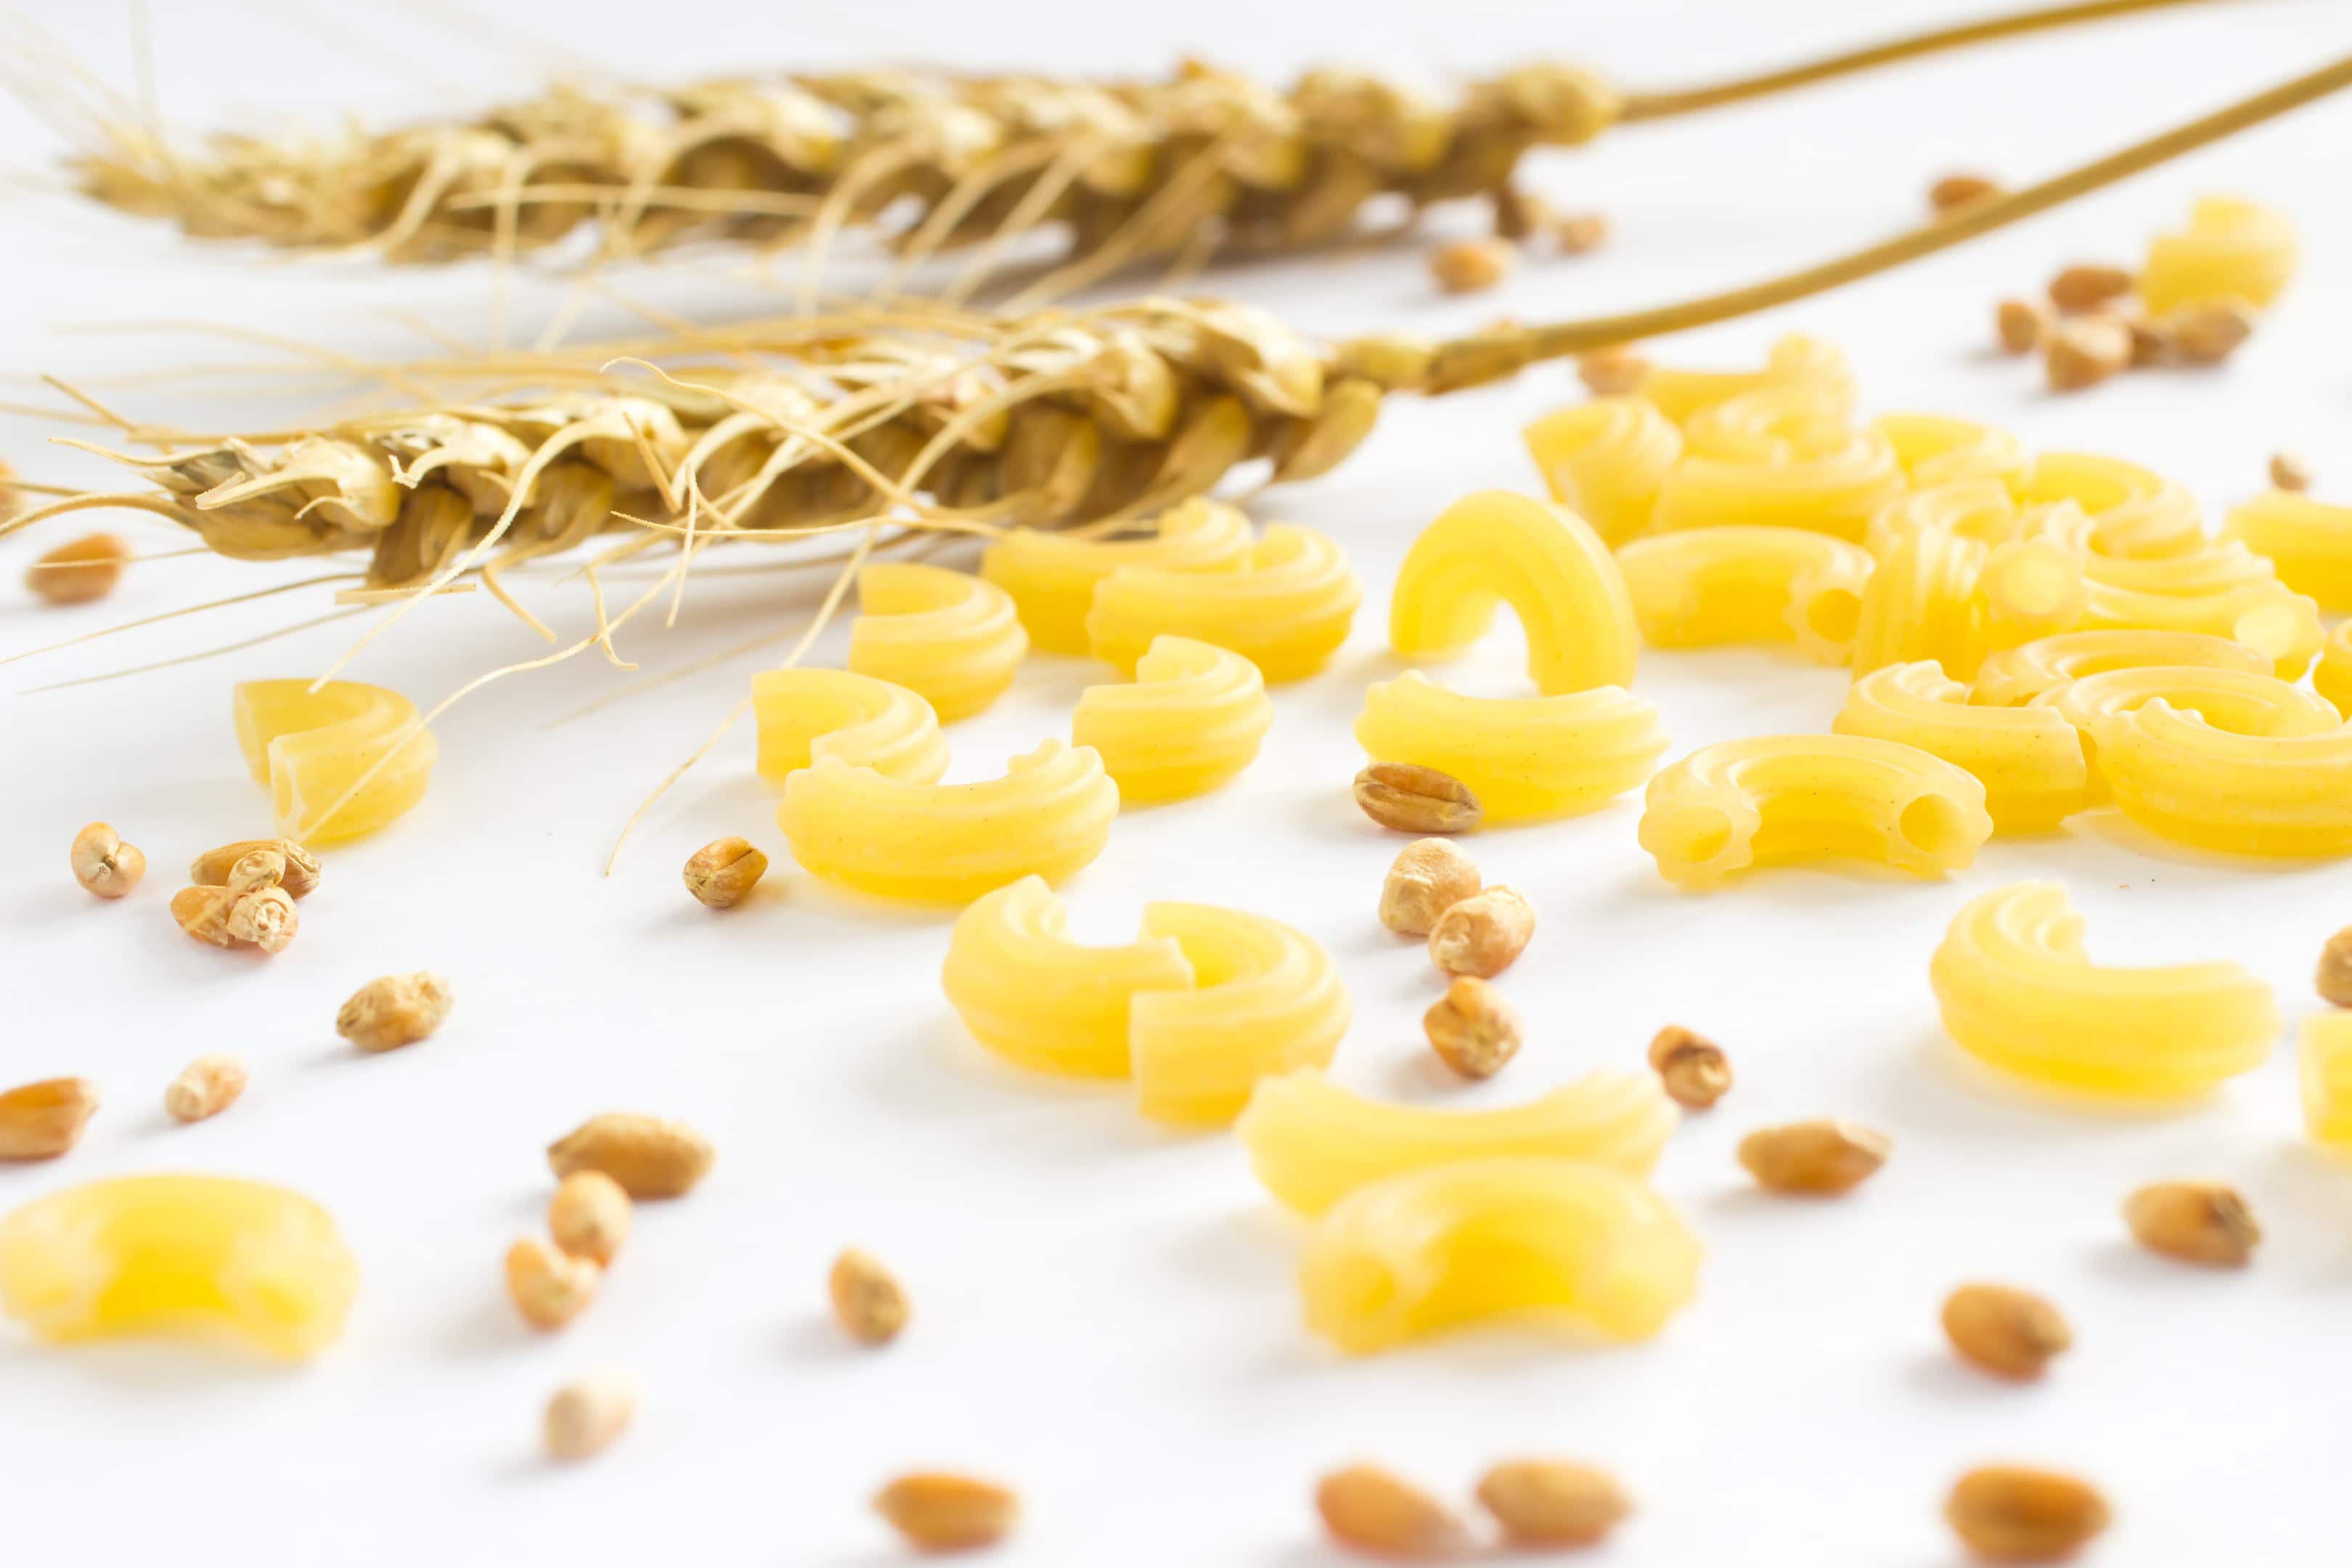 Gluten pasta tubes and wheat twigs with wheat grains on white background